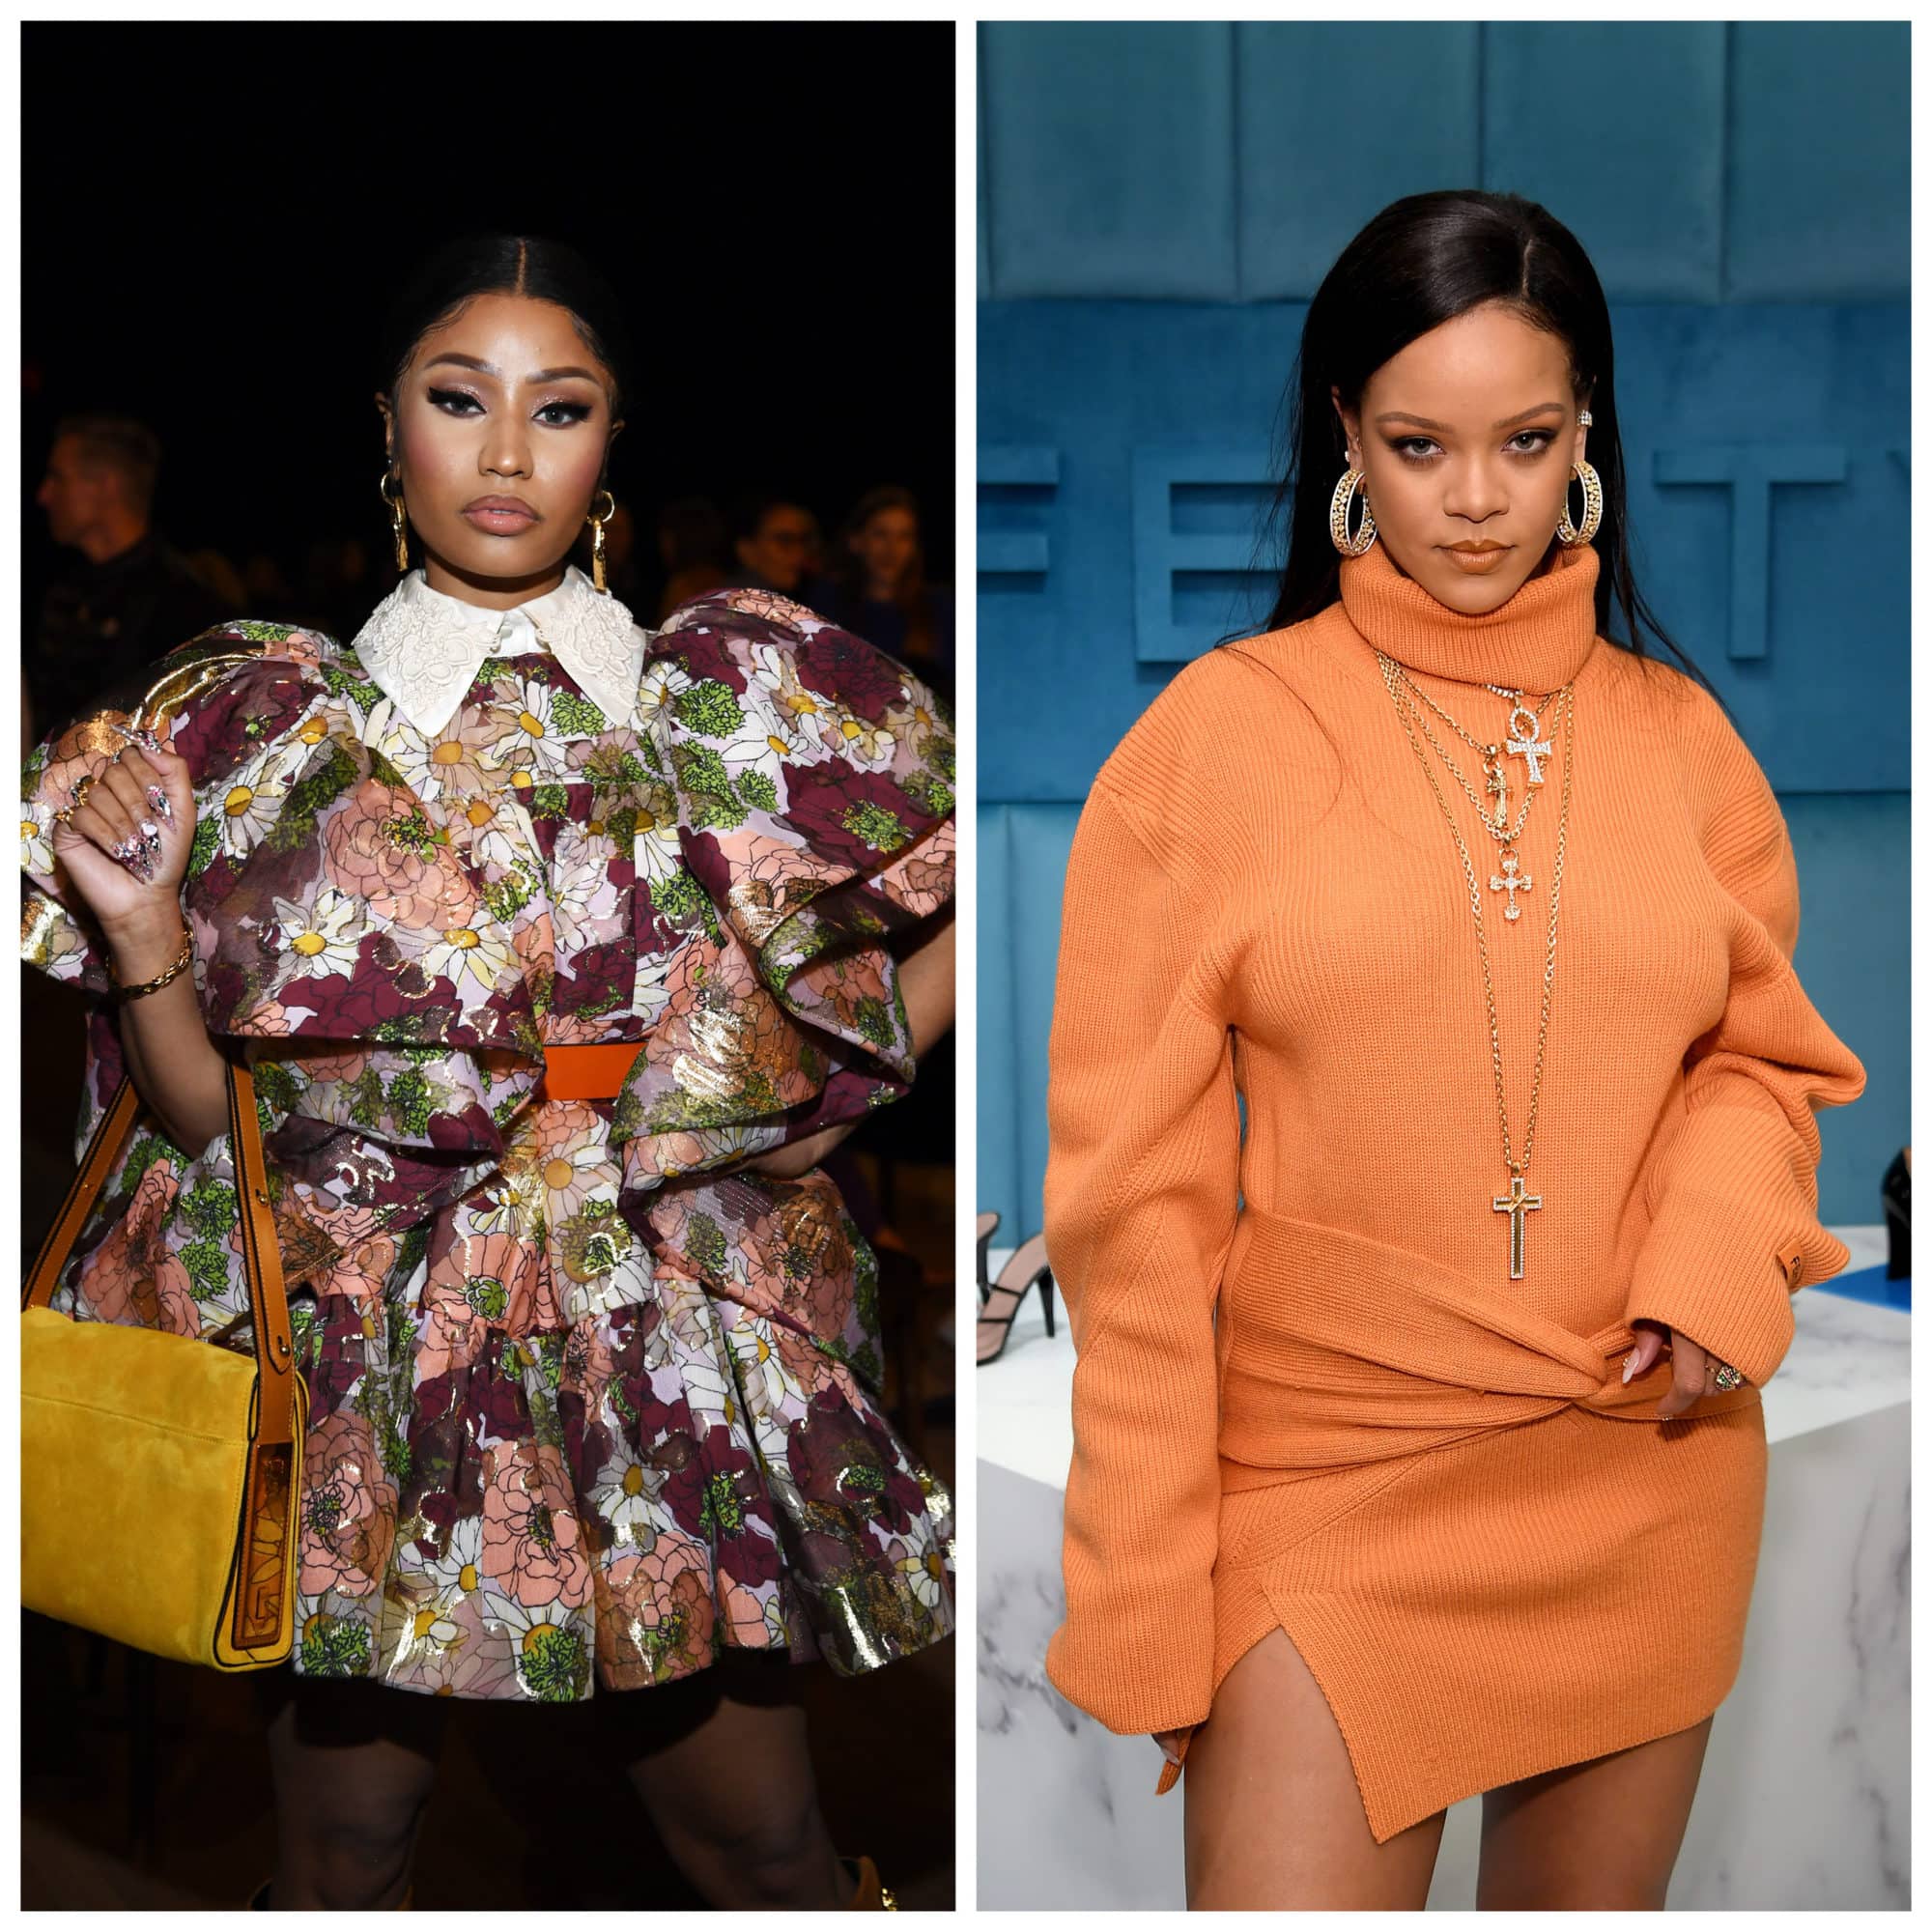 Nicki Minaj and Rihanna follow each other again on Instagram after the superstars had reportedly been feuding for several years.